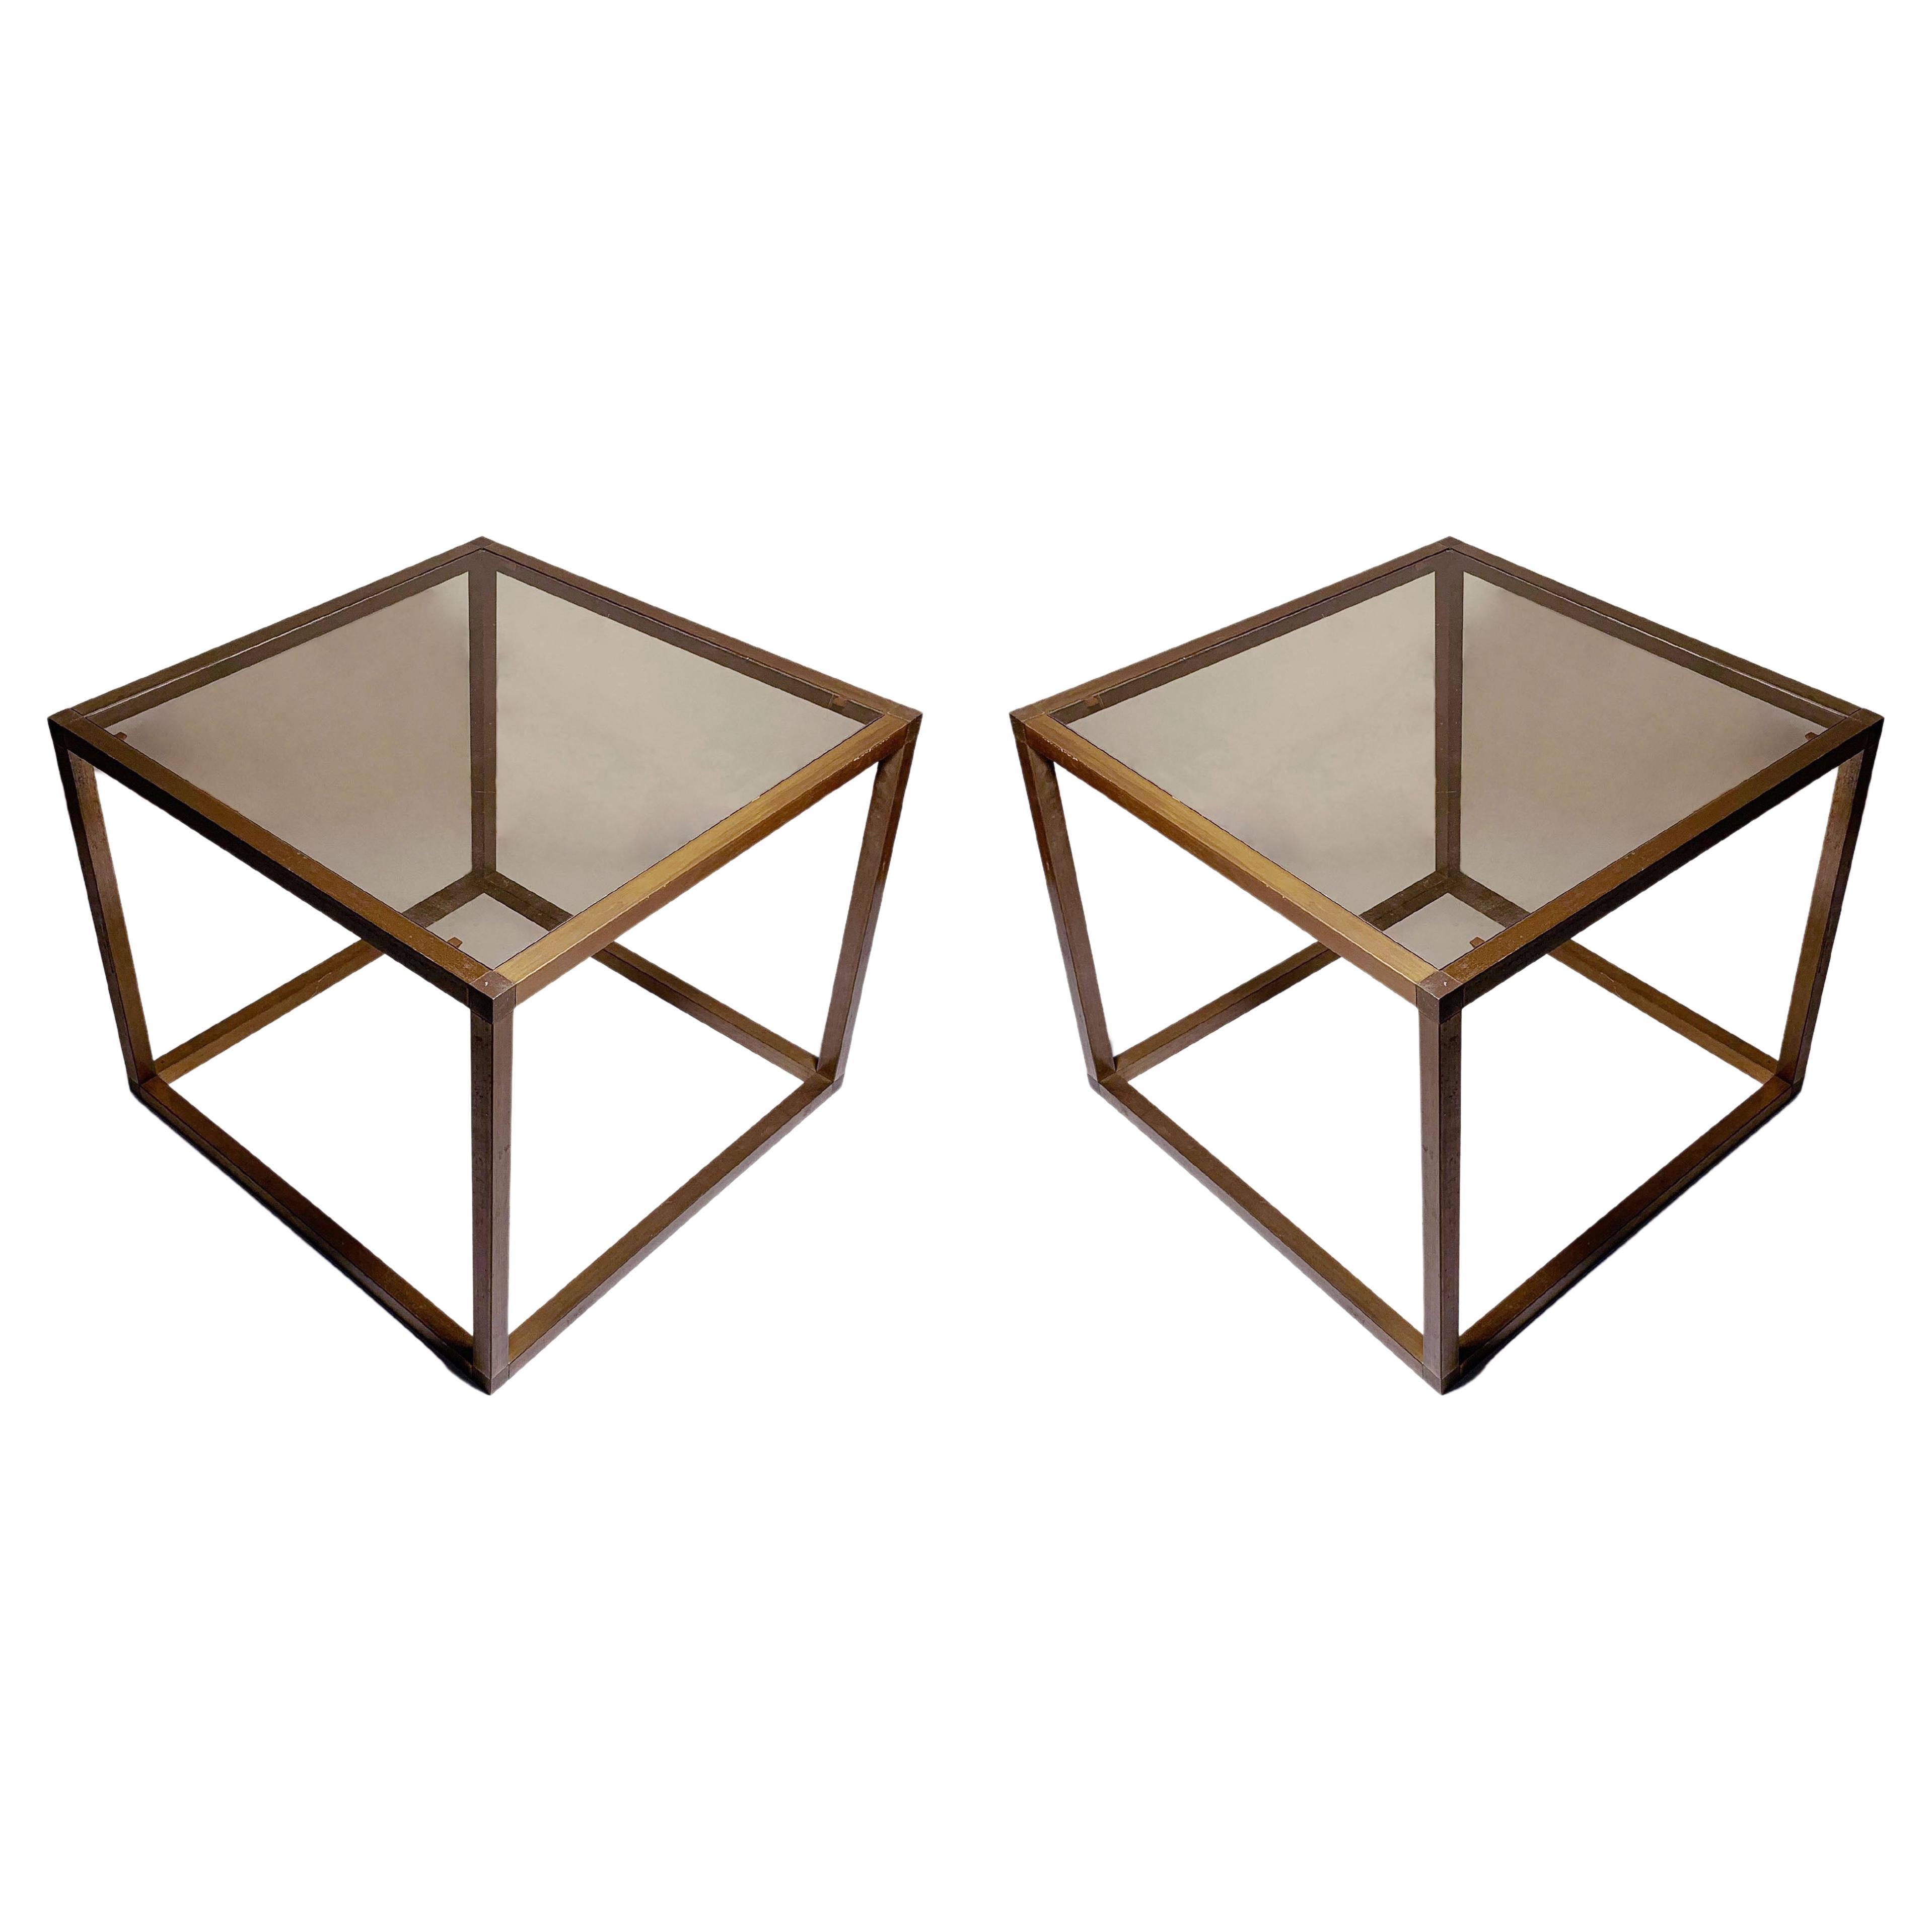 Pair of Bronzed Extrusion Open Space Architectural Side Tables